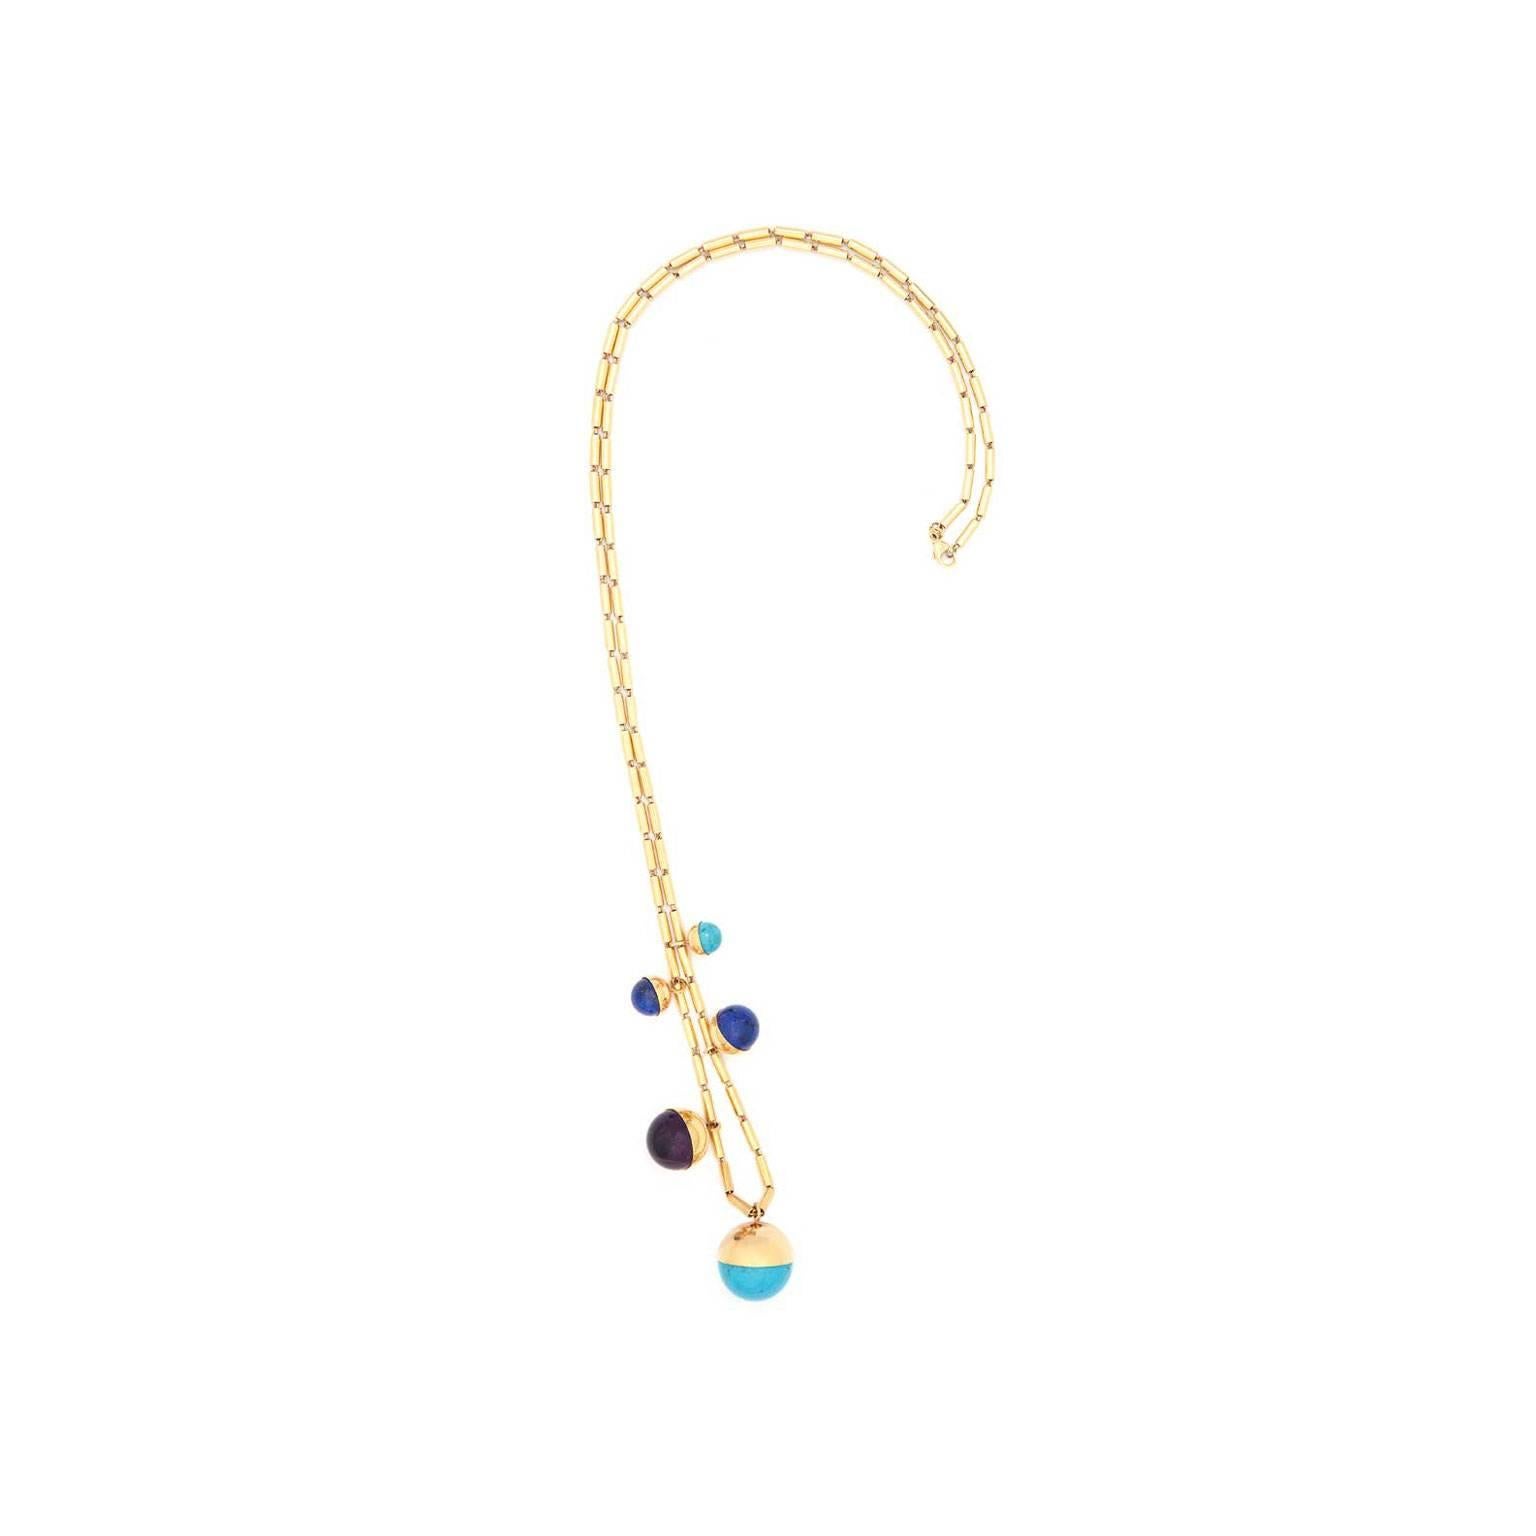 Lara Bohinc Lapis Turquoise Amethyst Gold Five Planets Necklace In Excellent Condition In London, Westminster